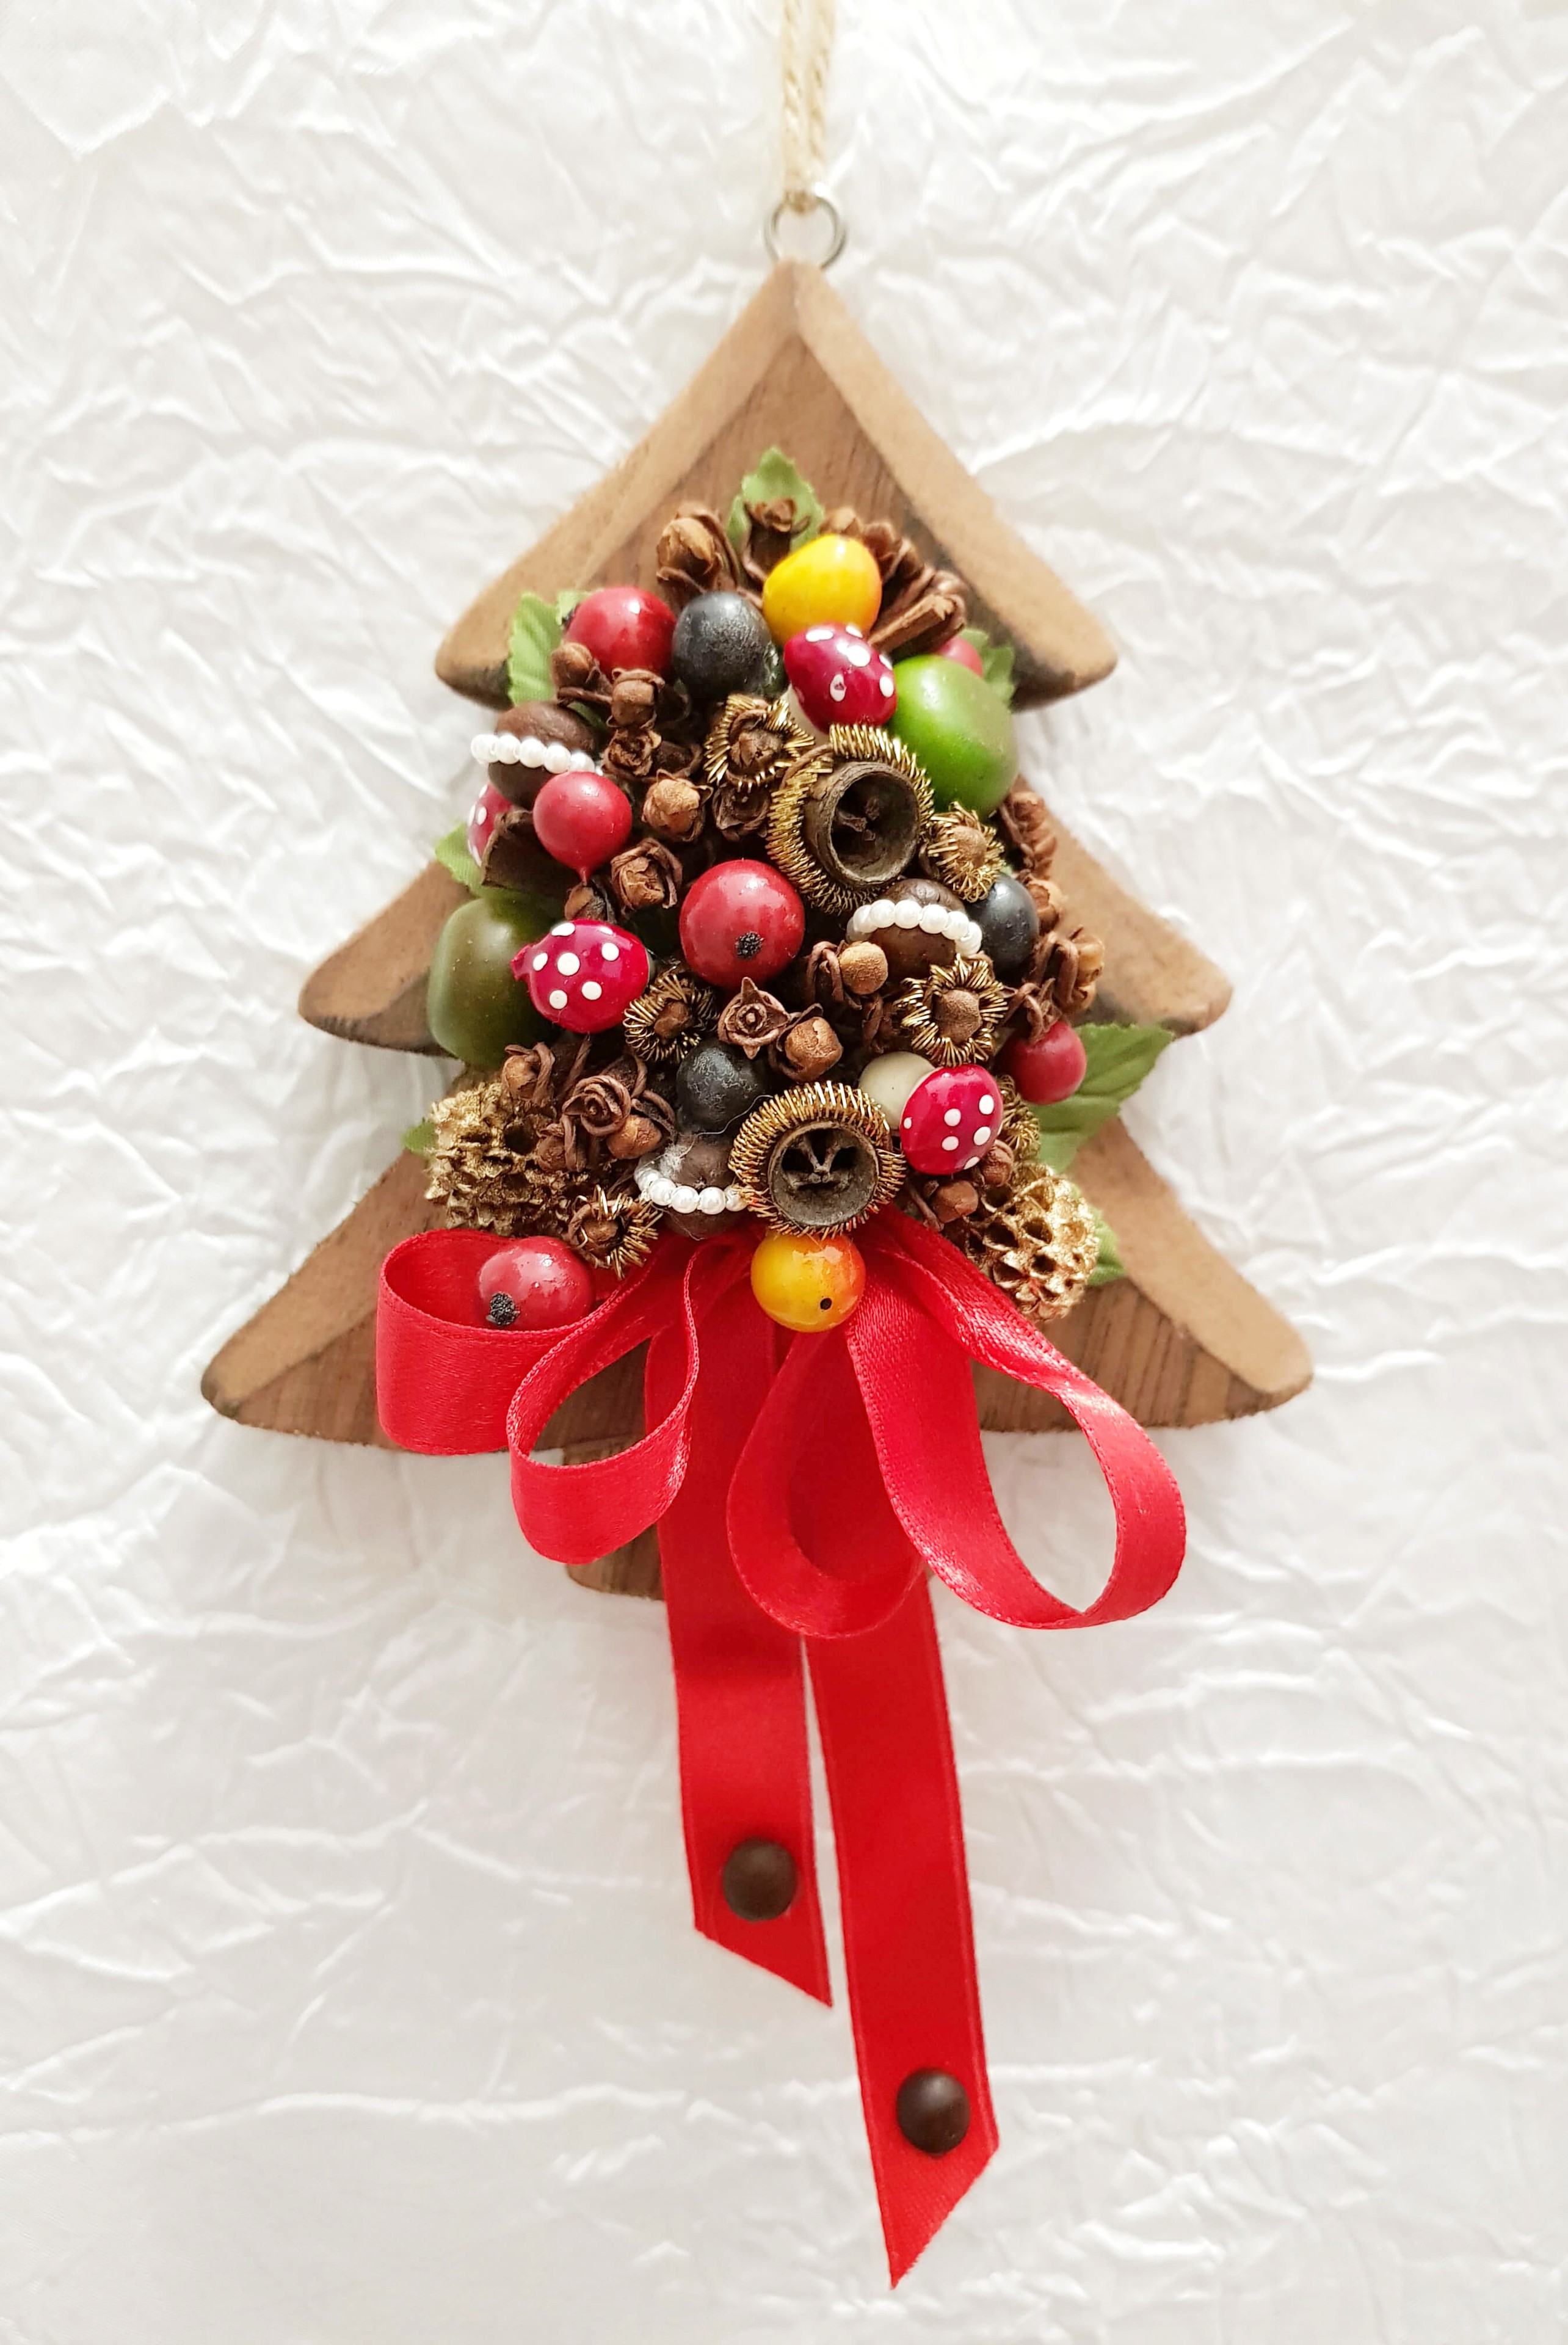 Fruit Tree - Special Christmas tree decorations